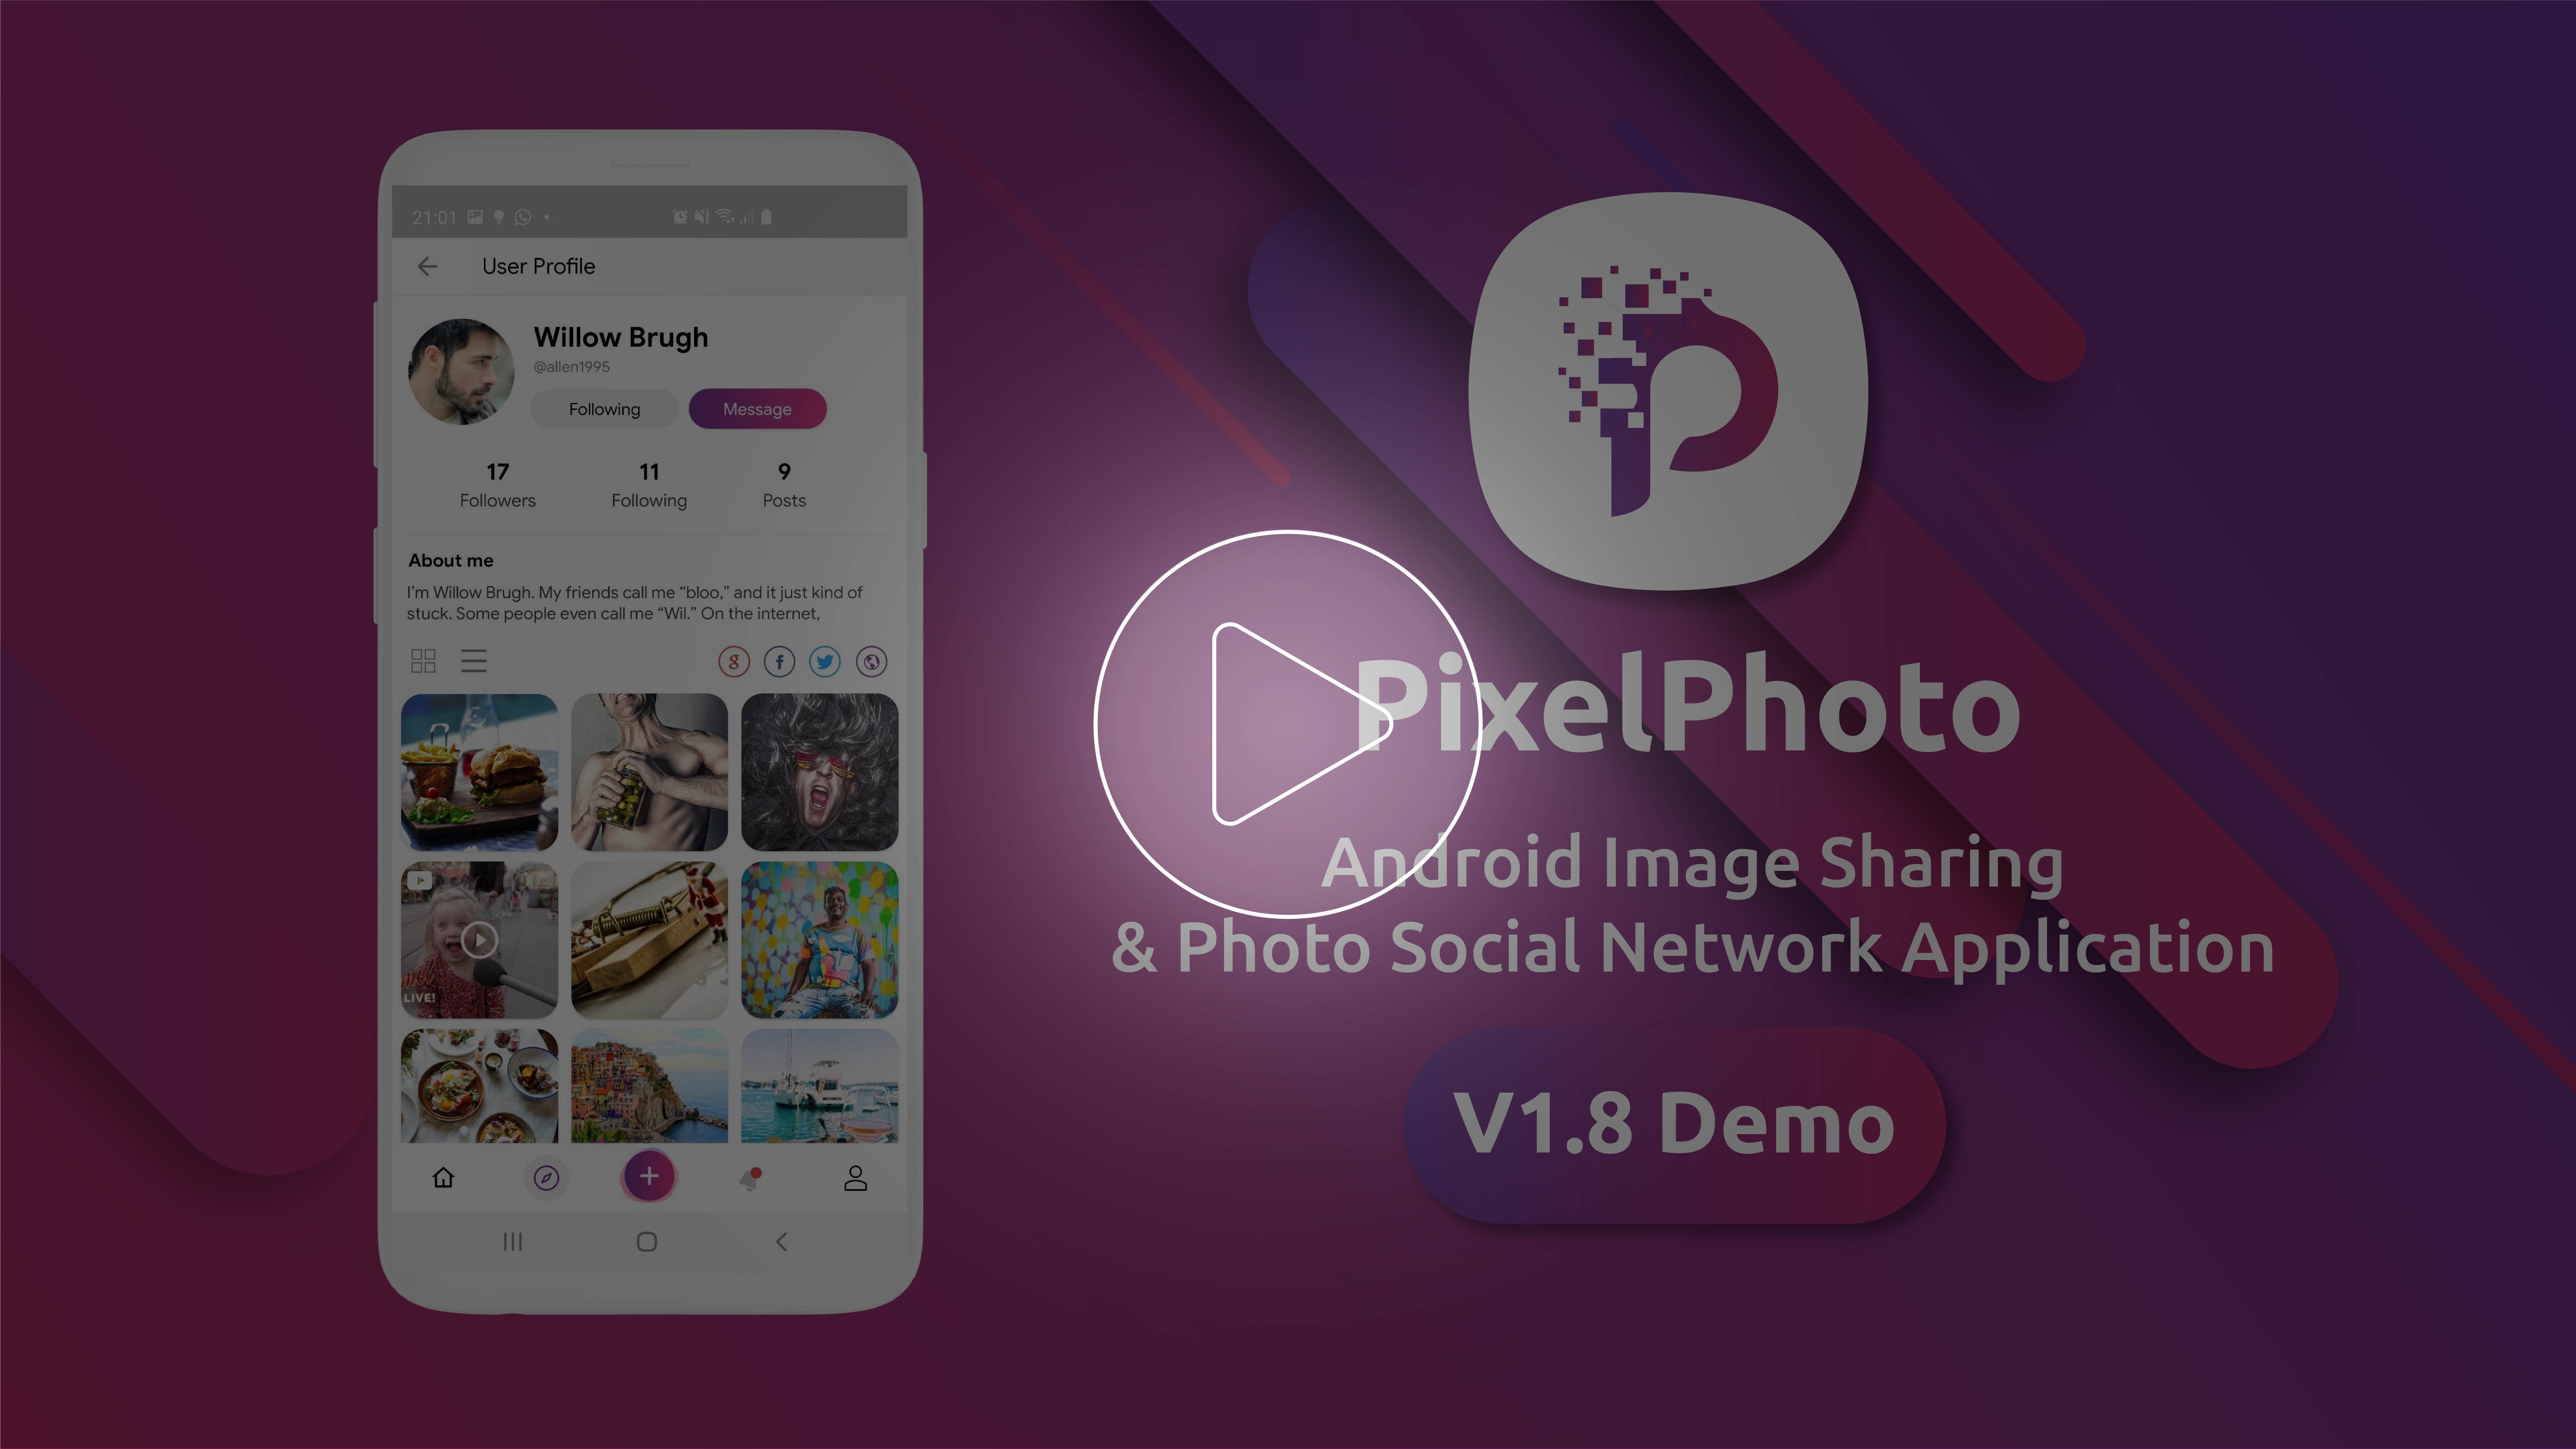 Instagram Clone | PixelPhoto Android- Mobile Image Sharing & Photo Social Network Application